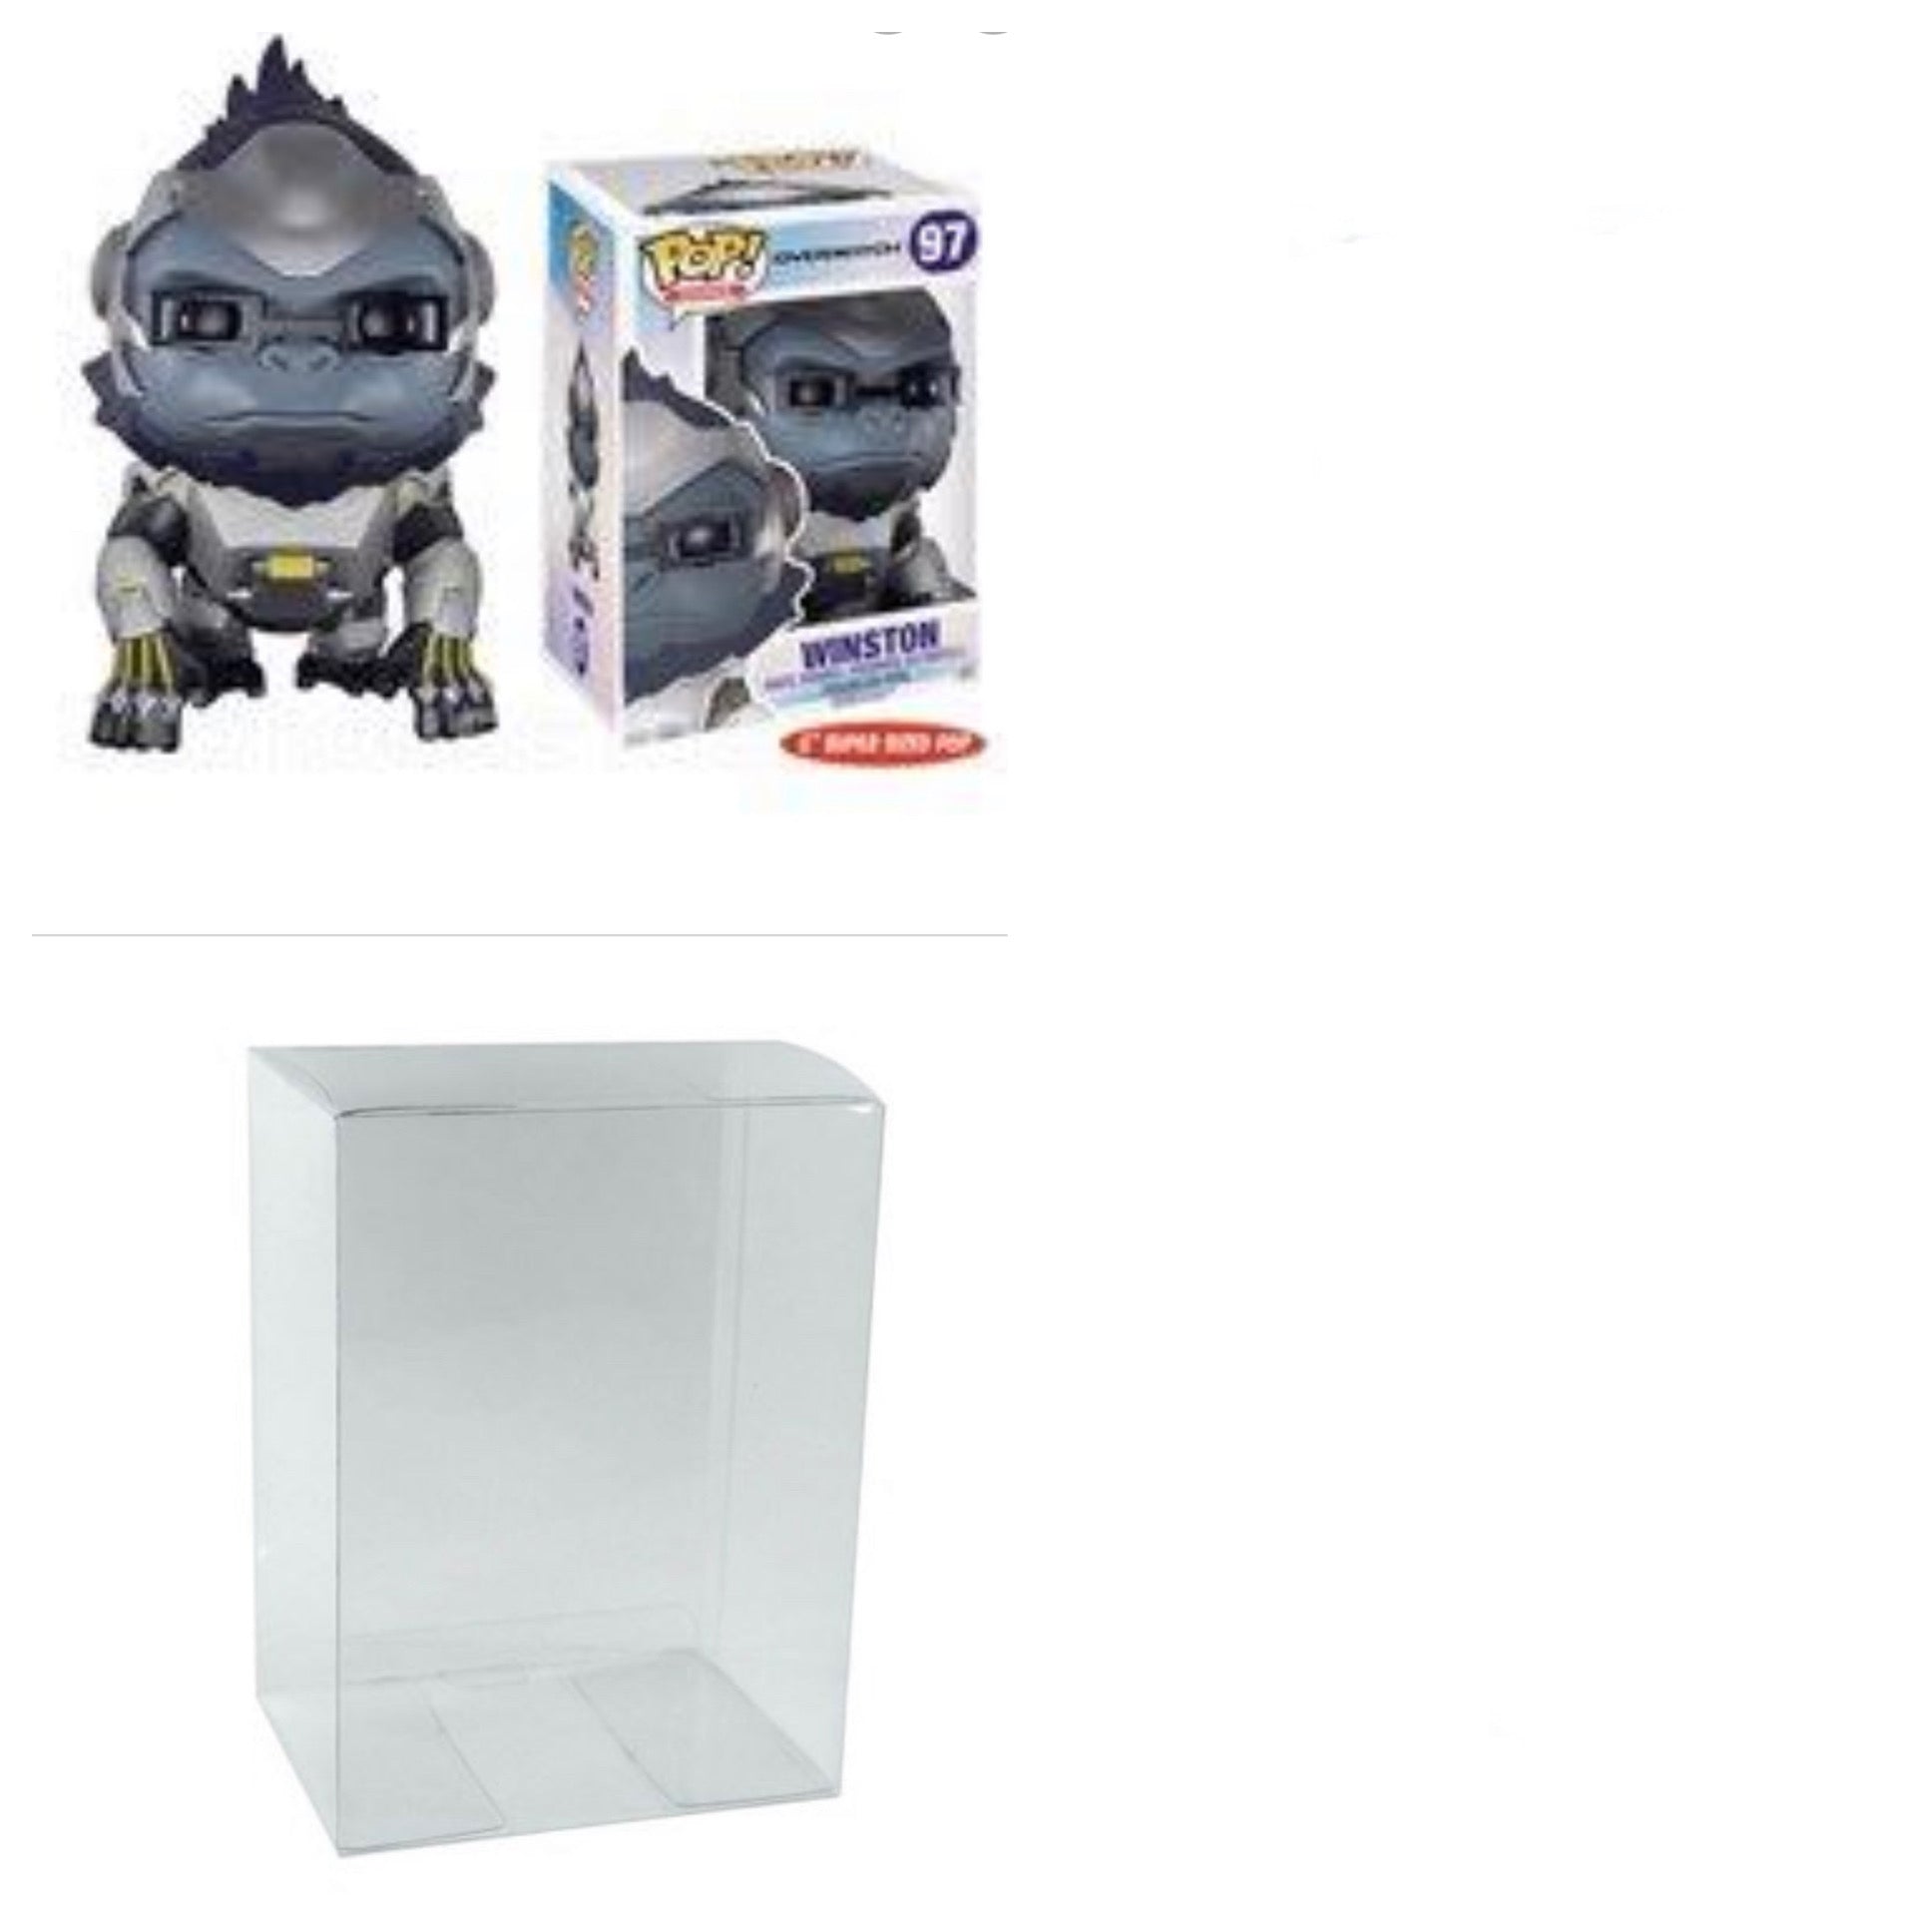 Winston Overwatch 6 Size Funko Pop with 0.50mm thi – Kollector Protector